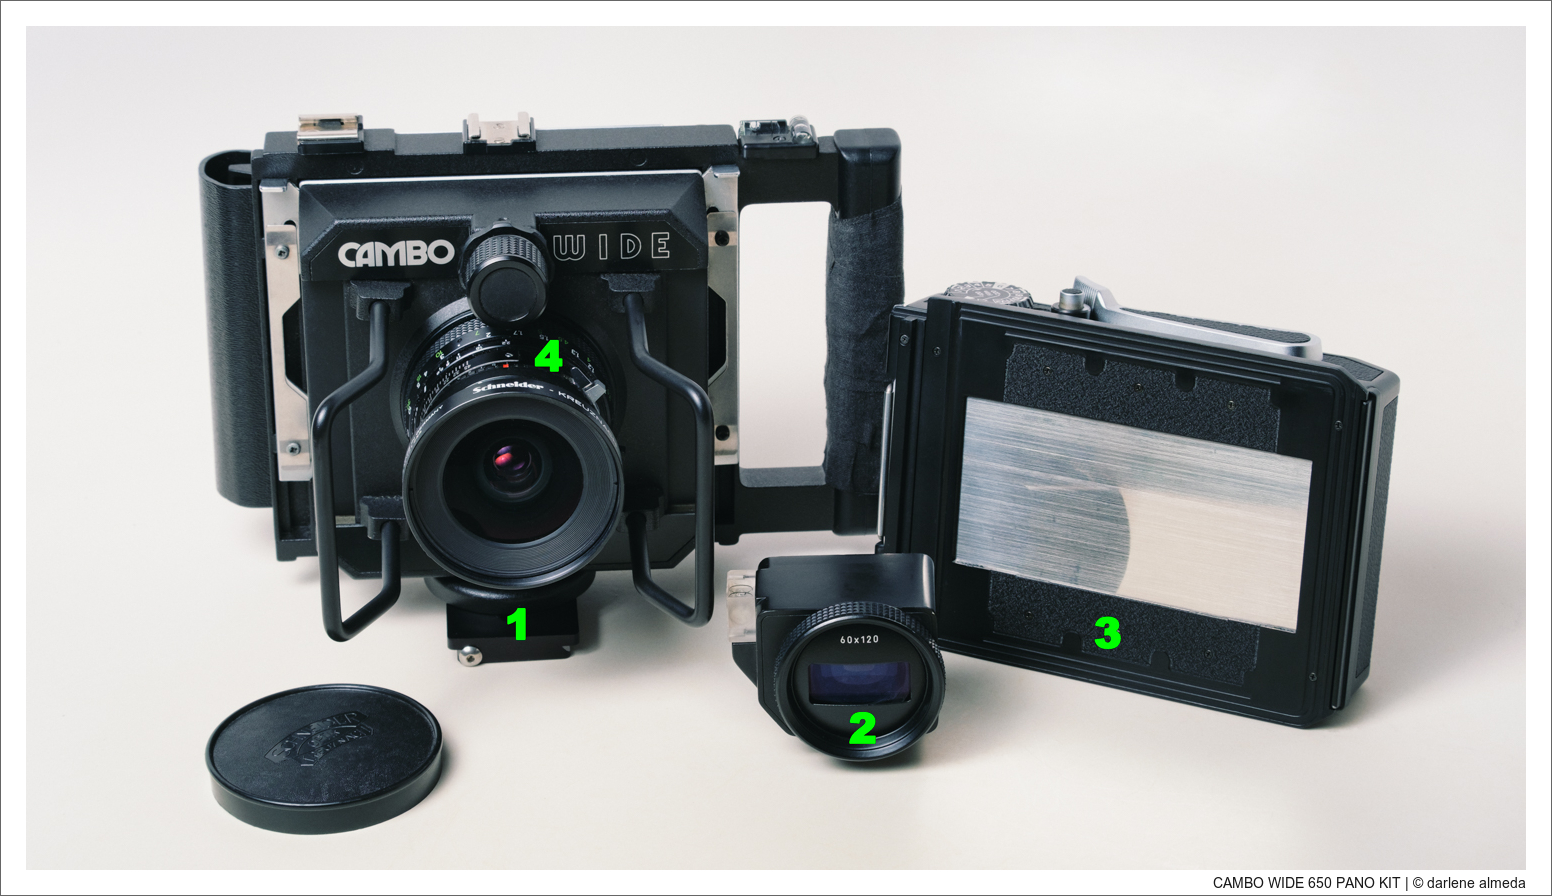 CAMBO WIDE 650 PANO KIT